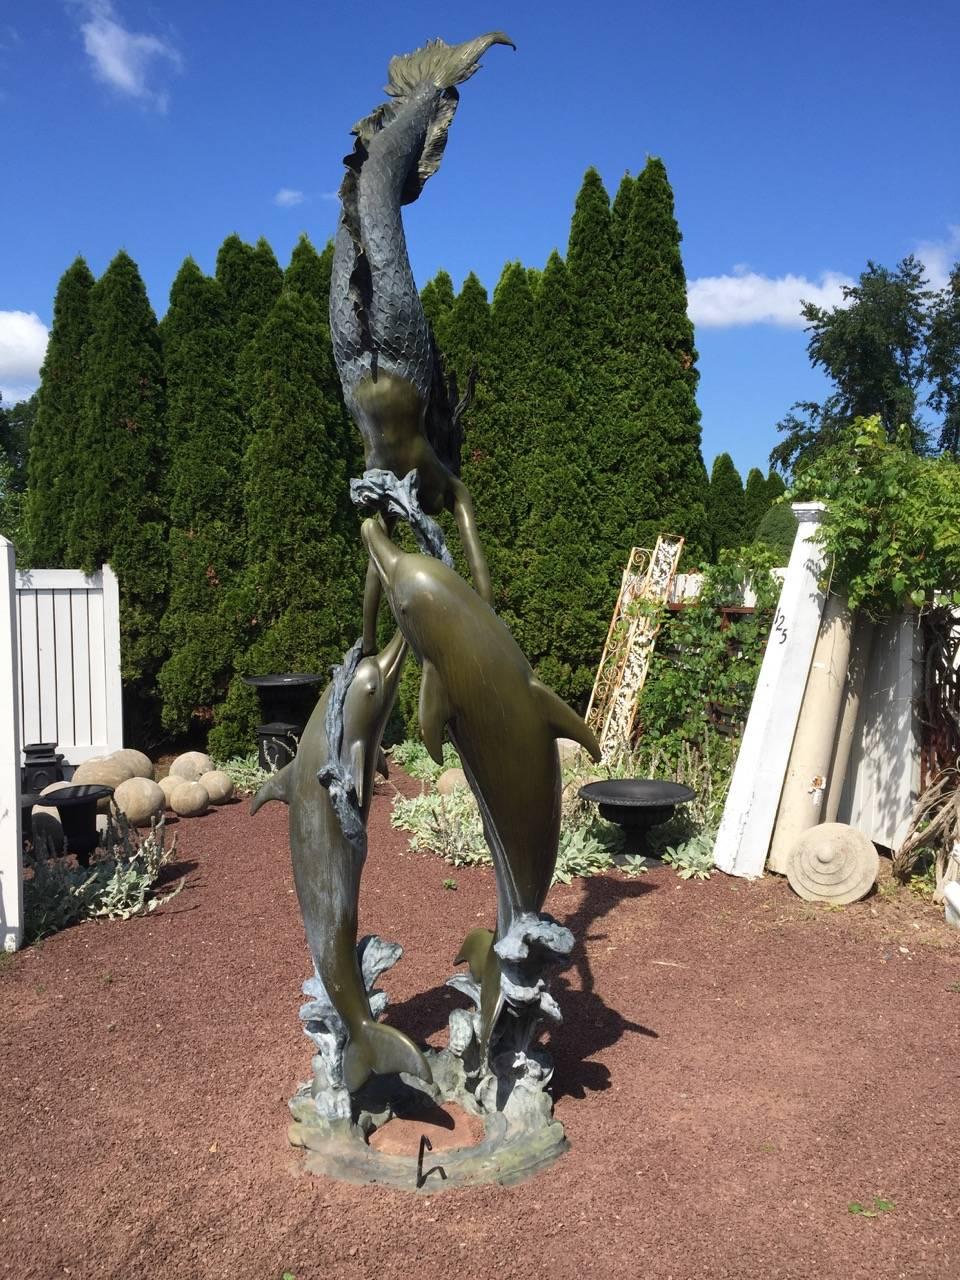 Monumental bronze statue with mermaid and dolphins. Signed “Jim Davidson” and approximately 30-40 years old. 12 ft 6 inches high and weighs approximately 600 lbs.
 